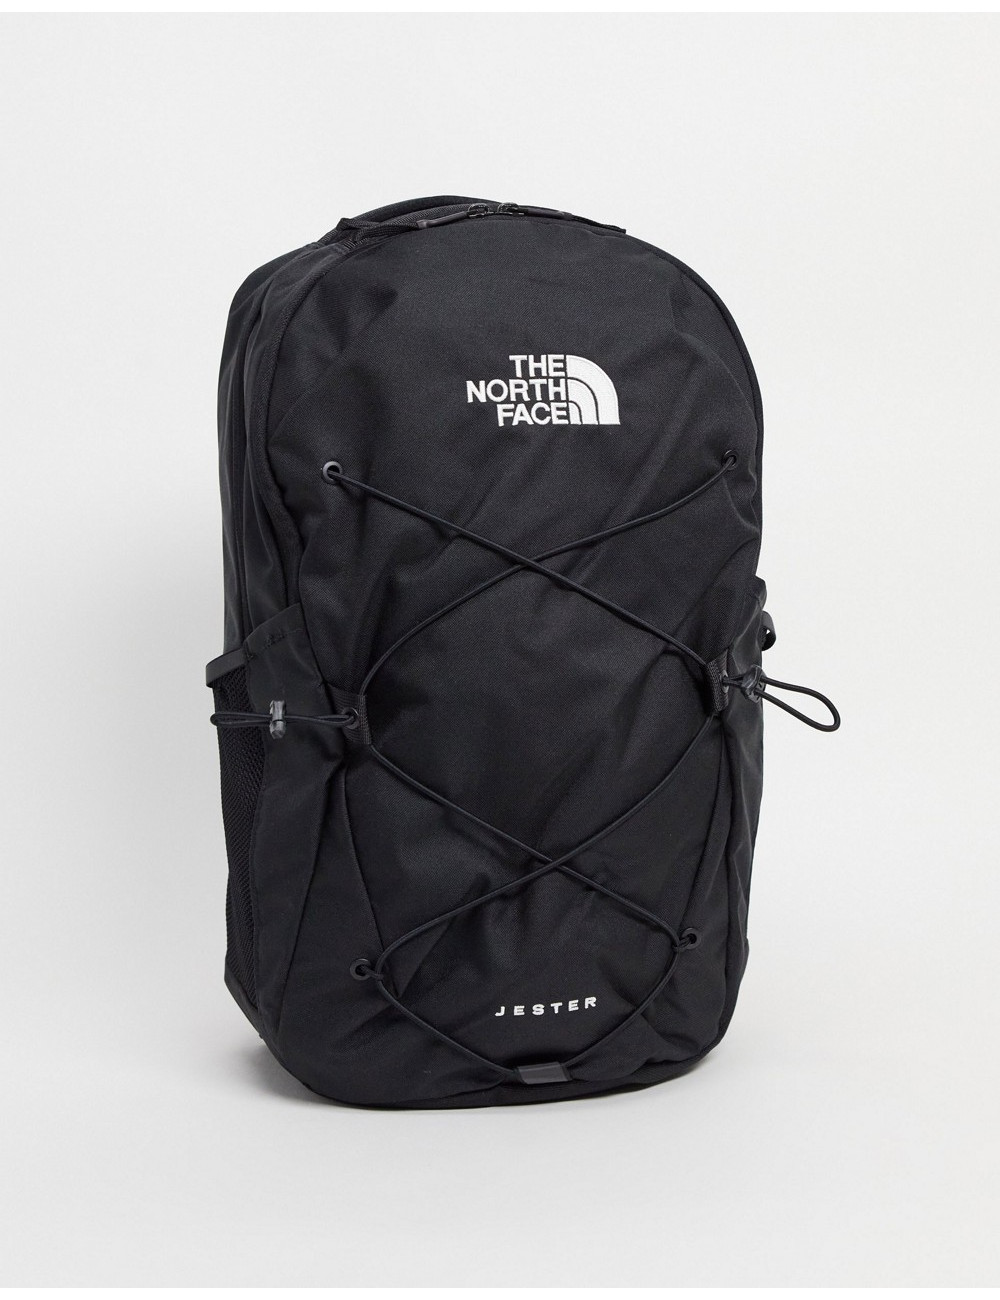 The North Face Jester...